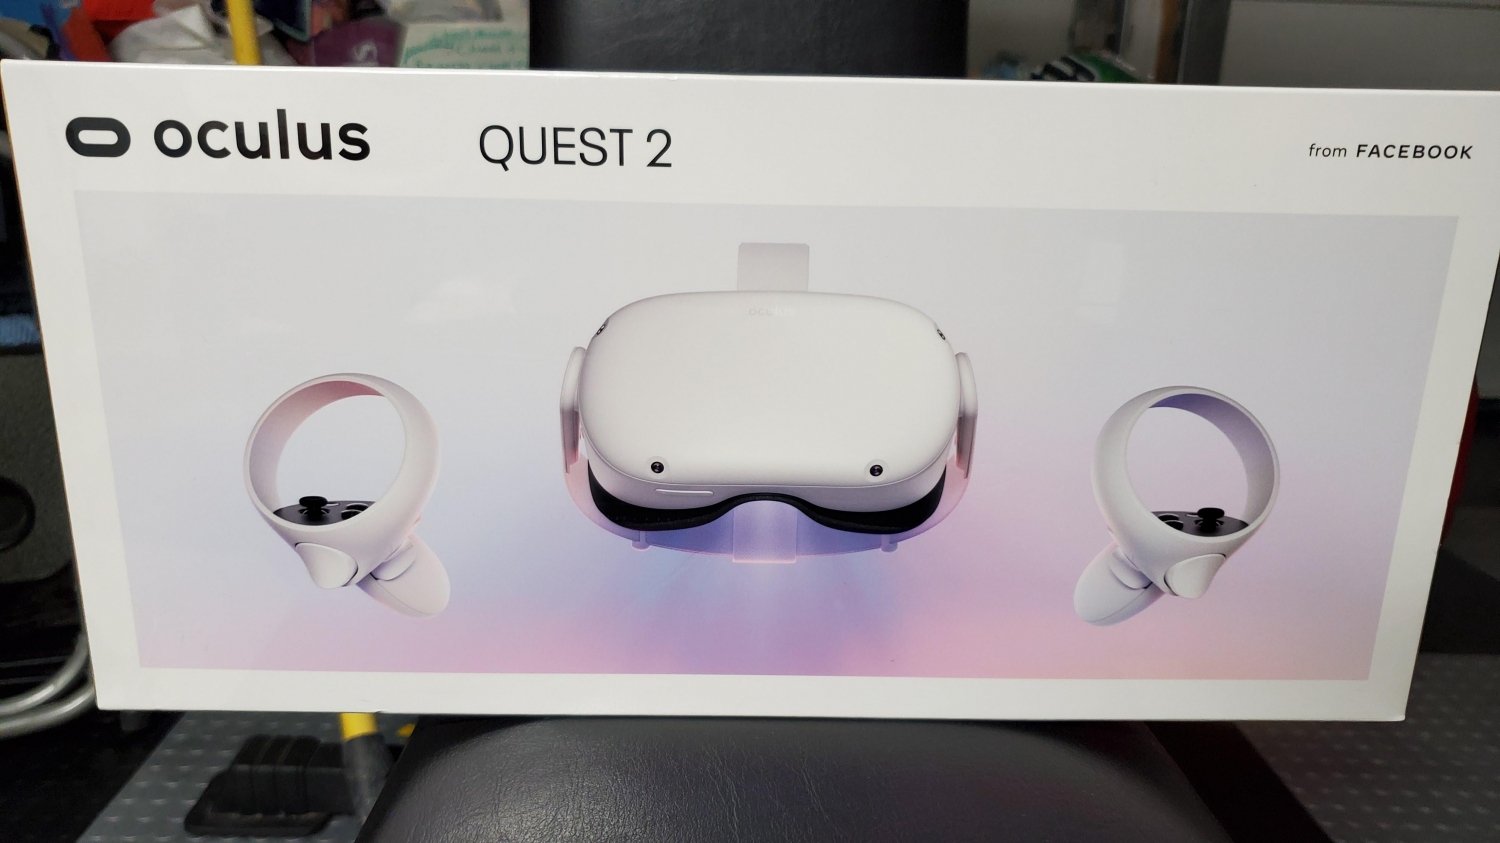 vr games coming to oculus quest